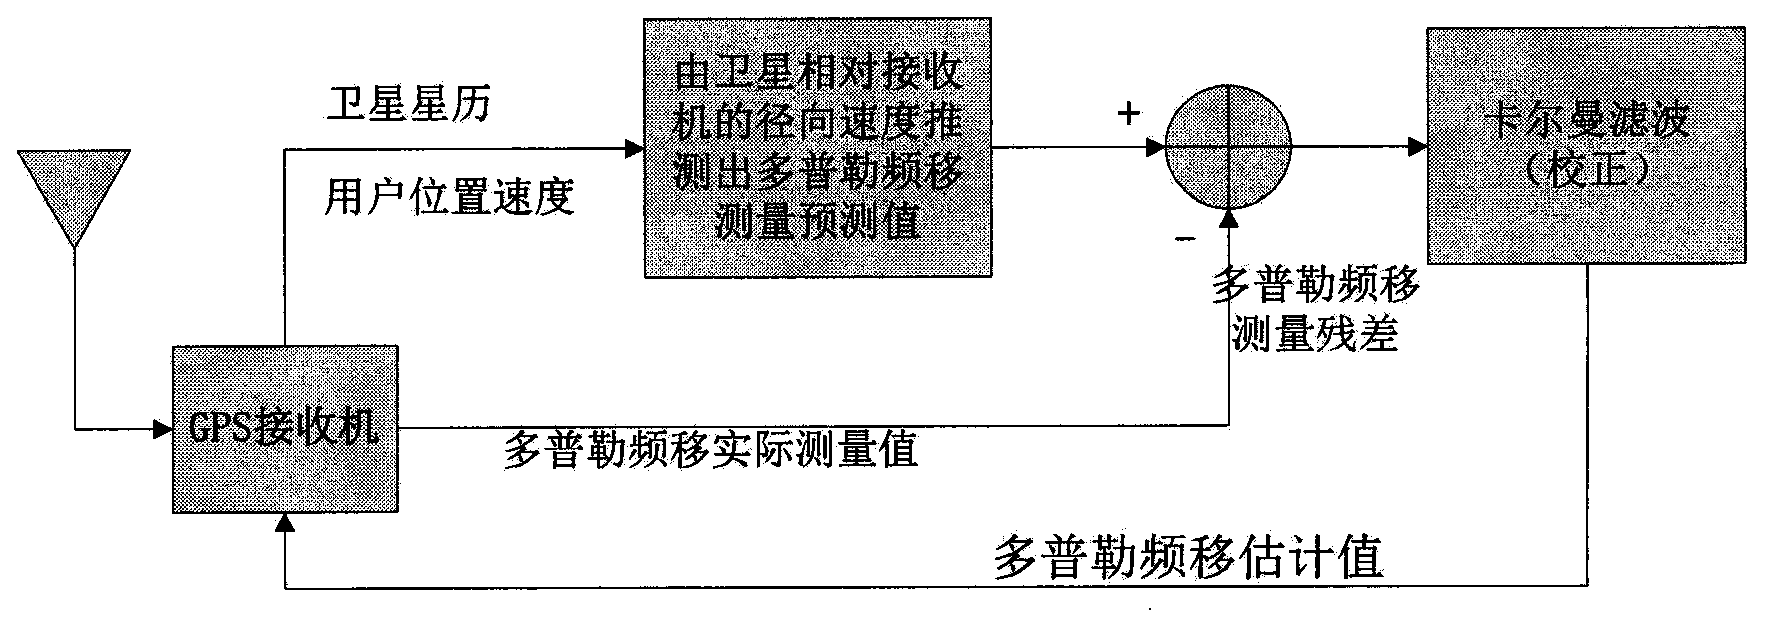 Receiver carrier wave tracking implementation method and system based on multi-information fusion assistance